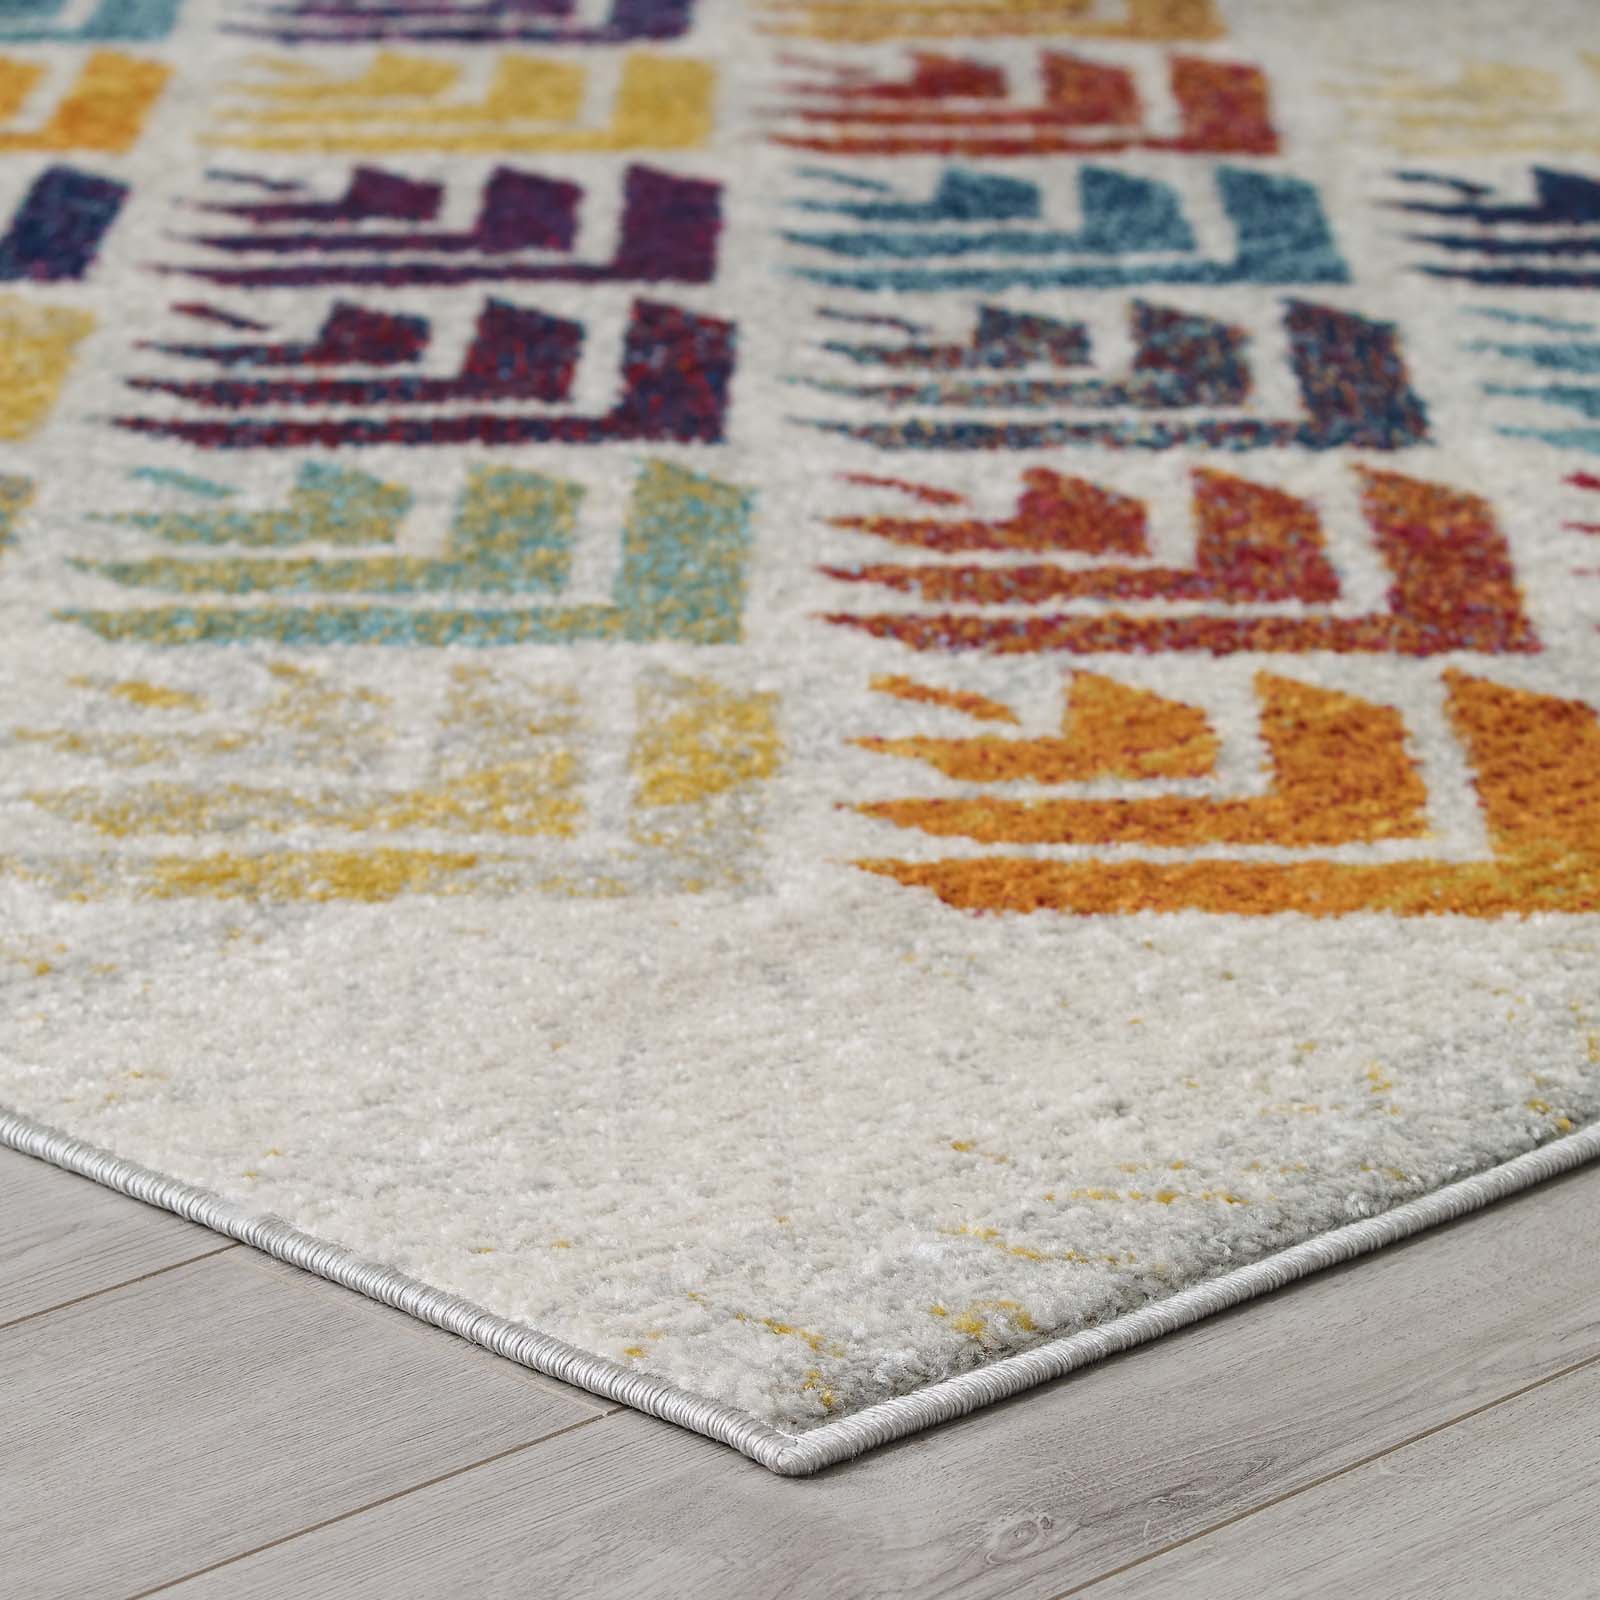 Entourage Florin Abstract Floral Area Rug - East Shore Modern Home Furnishings